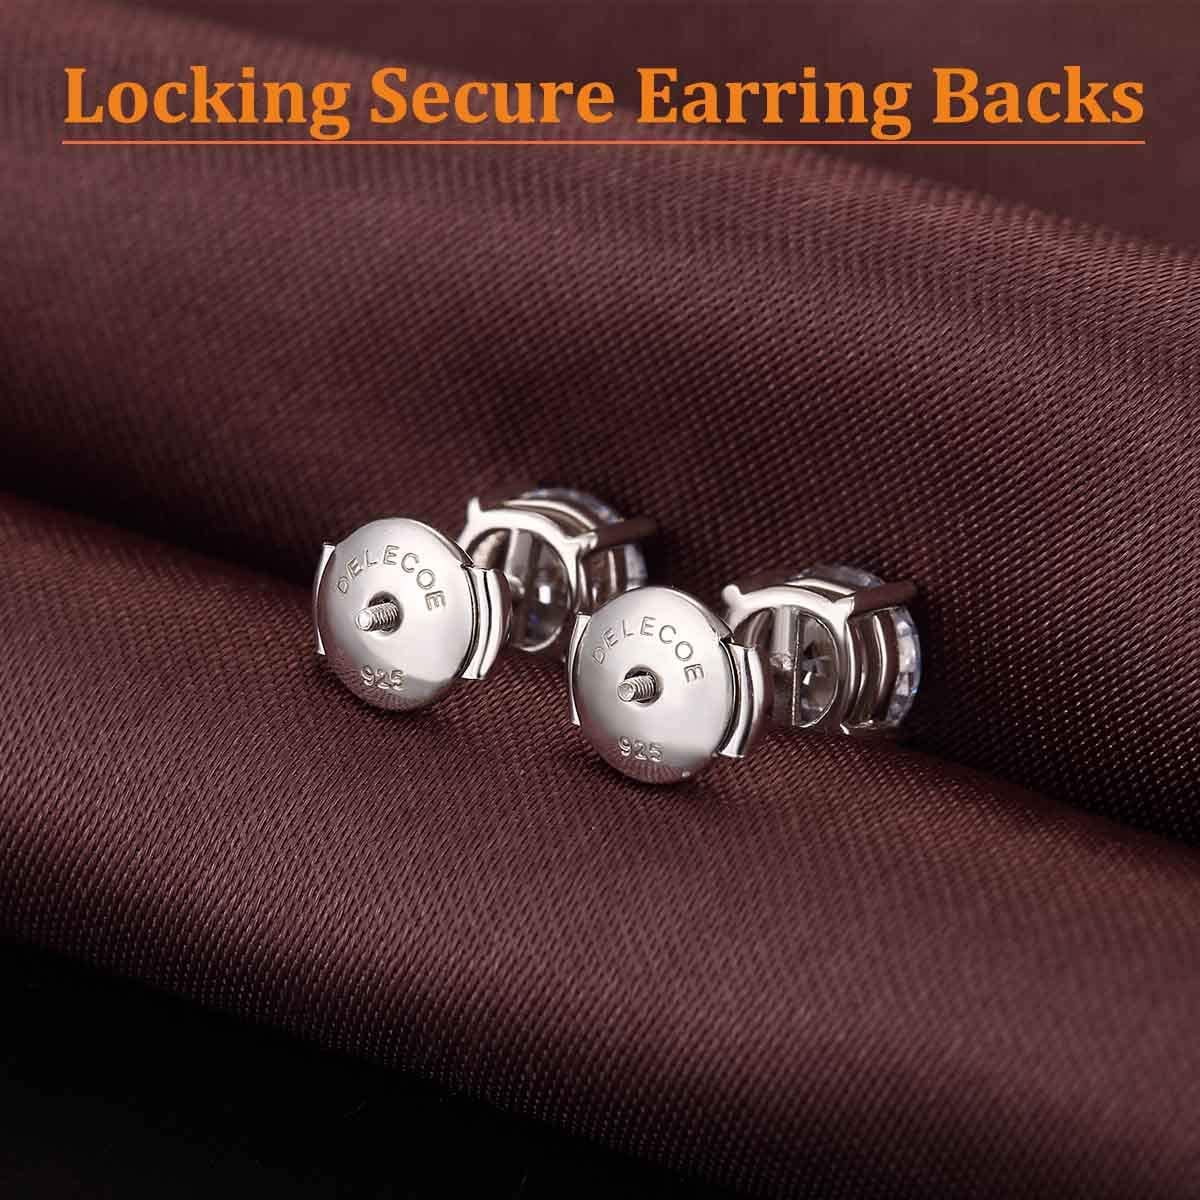 16pcs/8pair 18K Gold Plated Earring Backs for Studs, 925 Sterling Silver Earring Backs Replacements,No Fading Secure Hypoallergenic Secure Earring